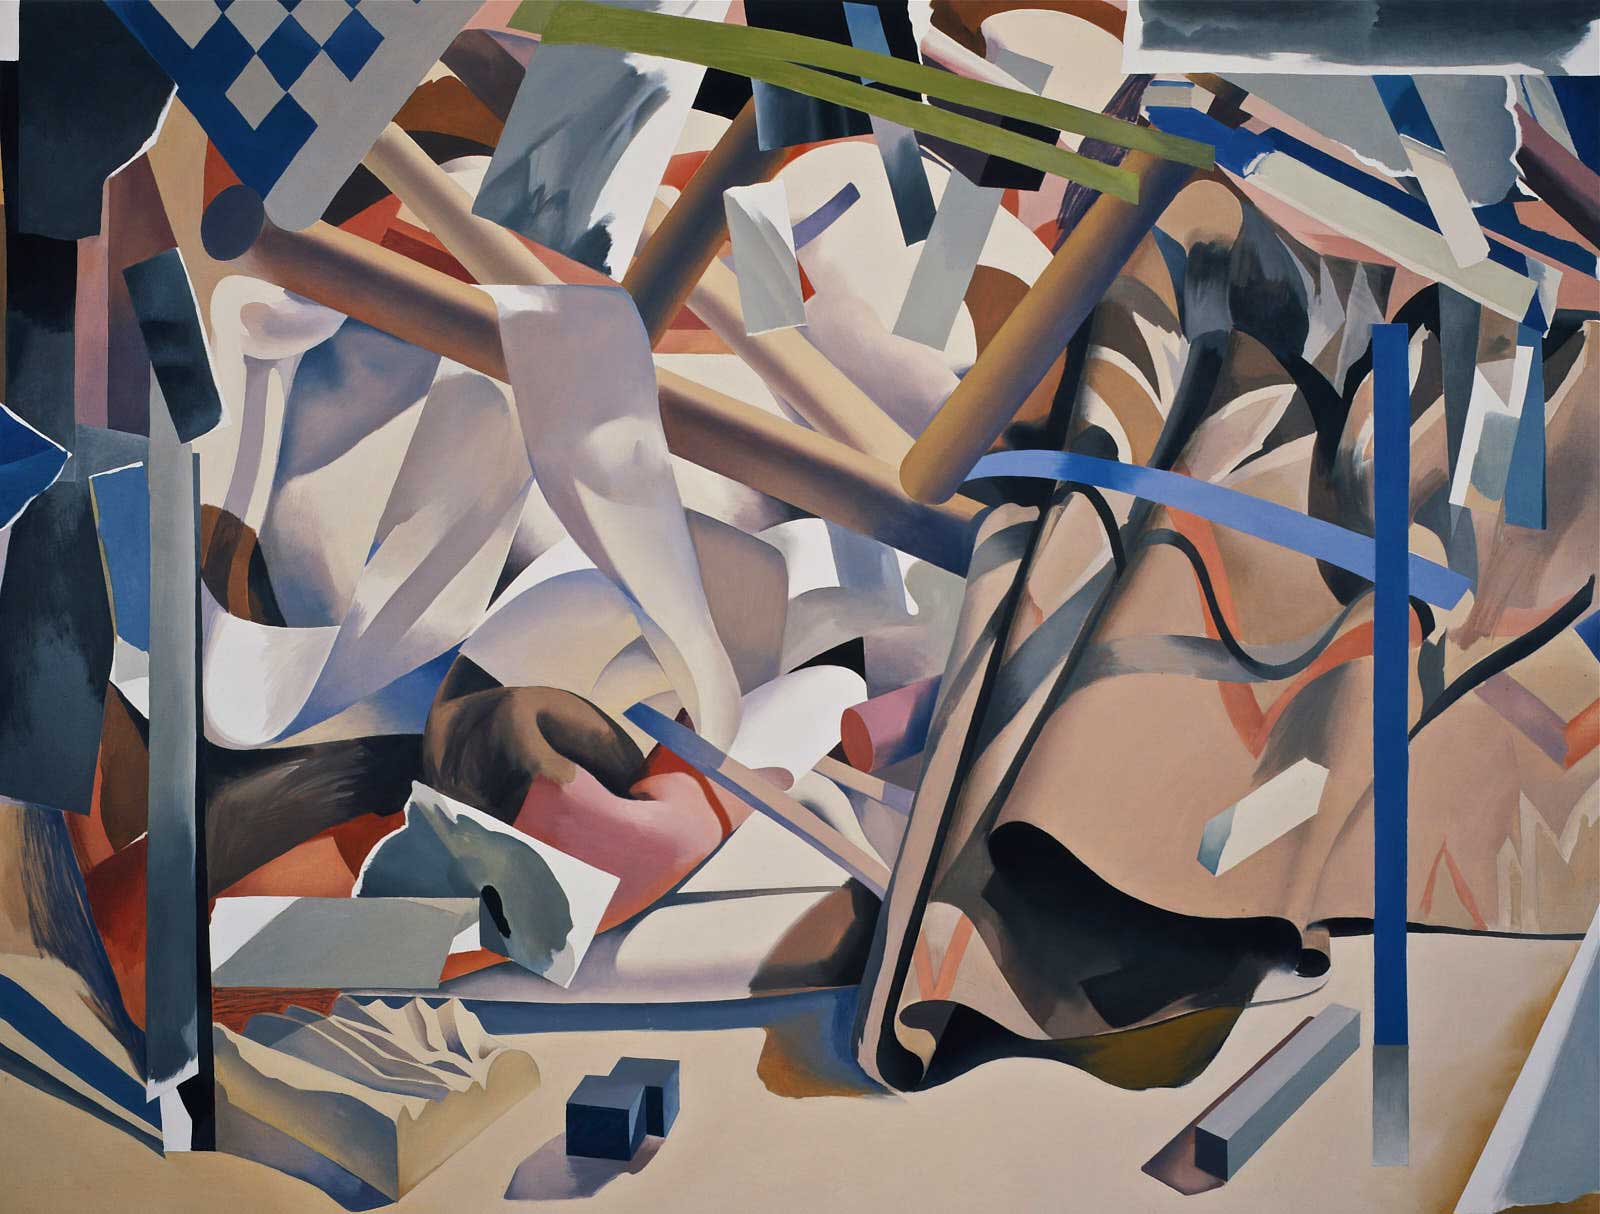 Still Life with Shaker Stool, 1984 oil on canvas. 72 x 96'' collection of Daniel Ullyot